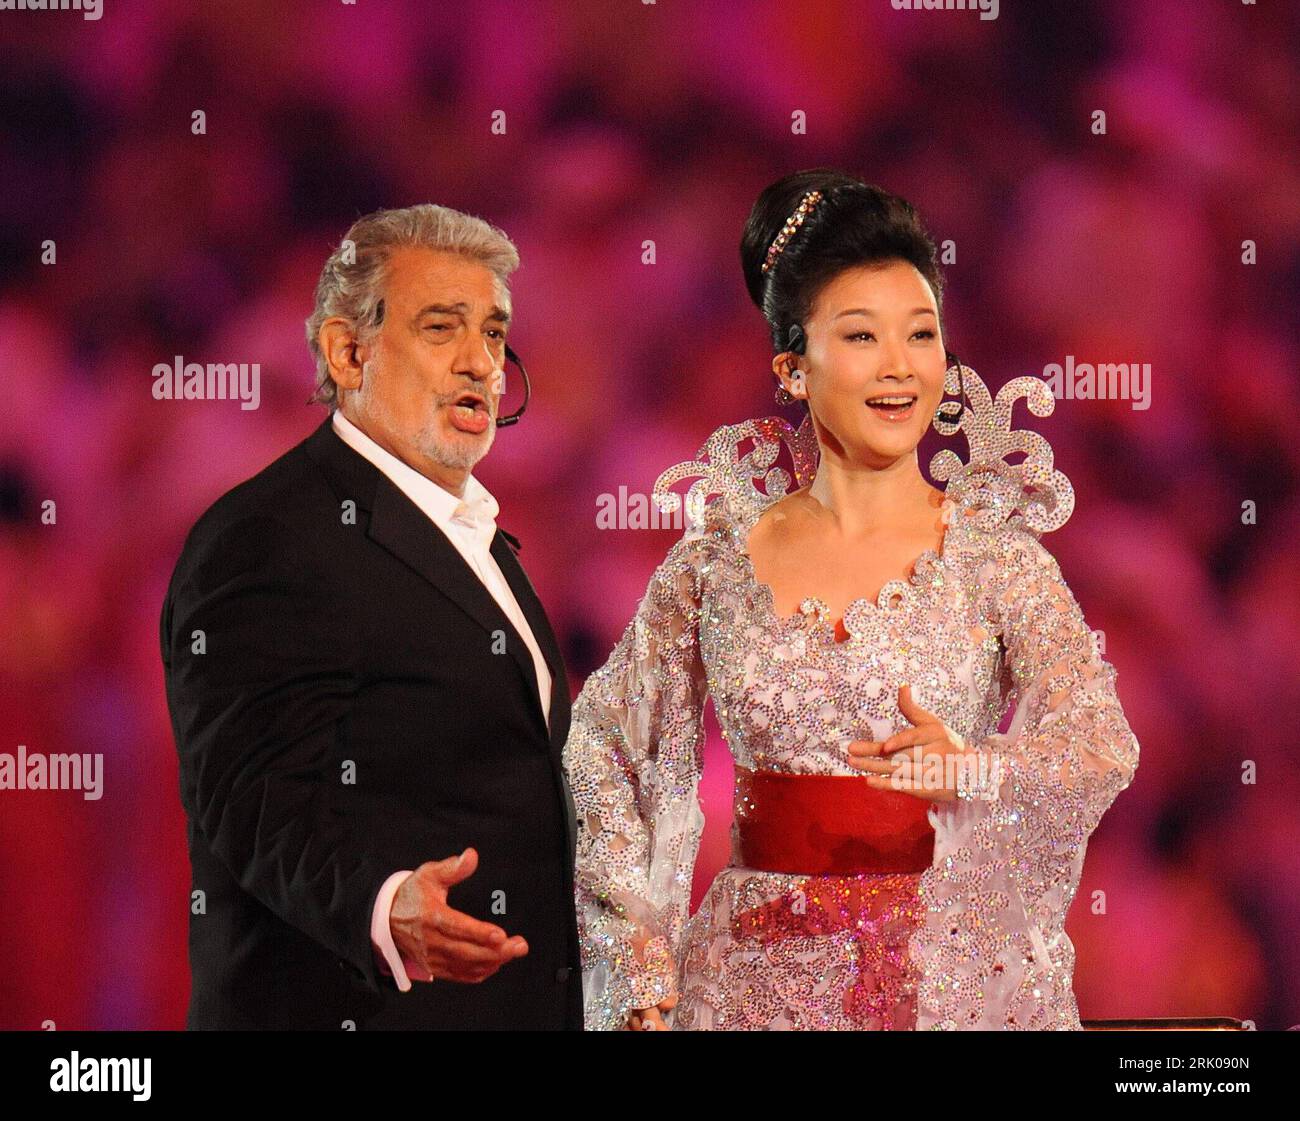 Placido domingo hi-res images stock 13 - Page - and Alamy photography